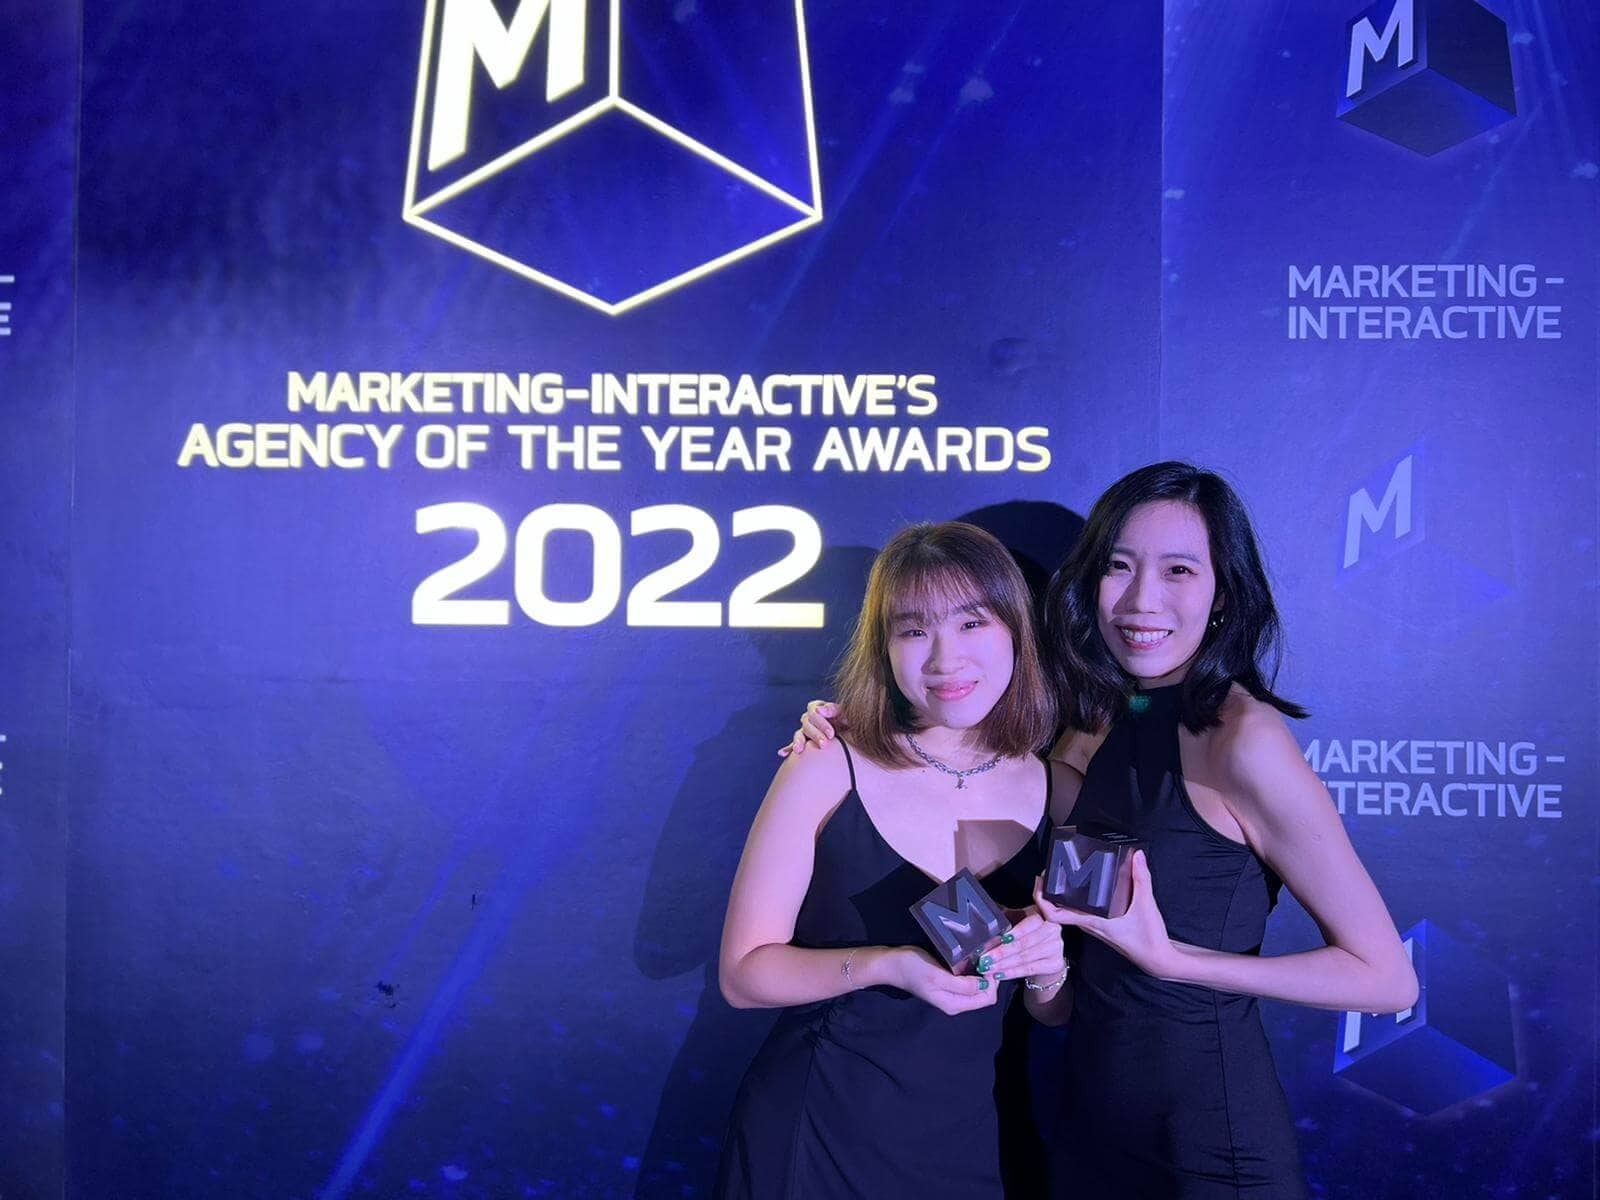 We Scored A Double In 2022's Agency Of The Year Awards